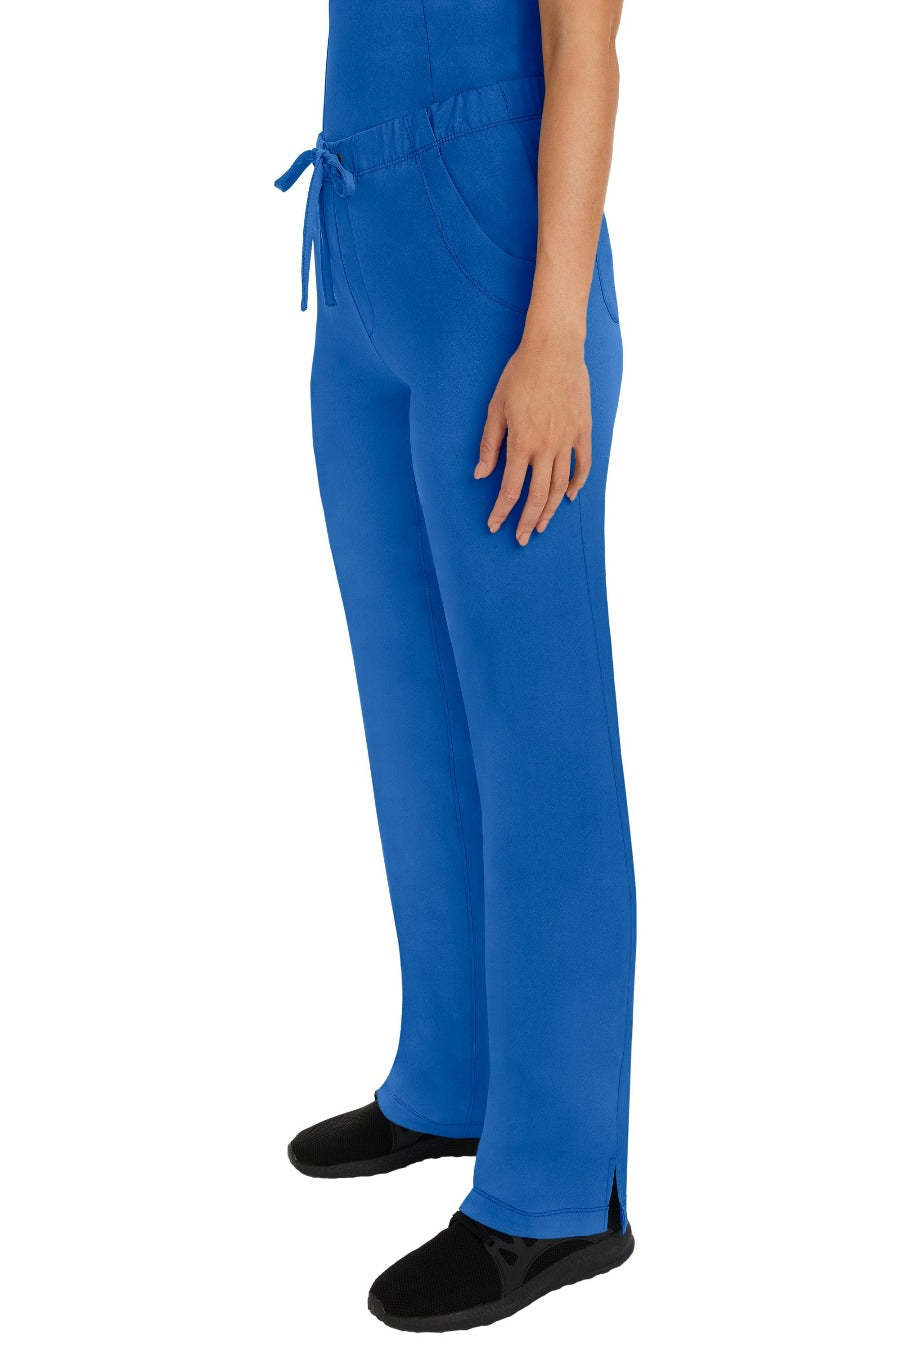 Healing hands hh works royal blue pants from Coulee Scrubs